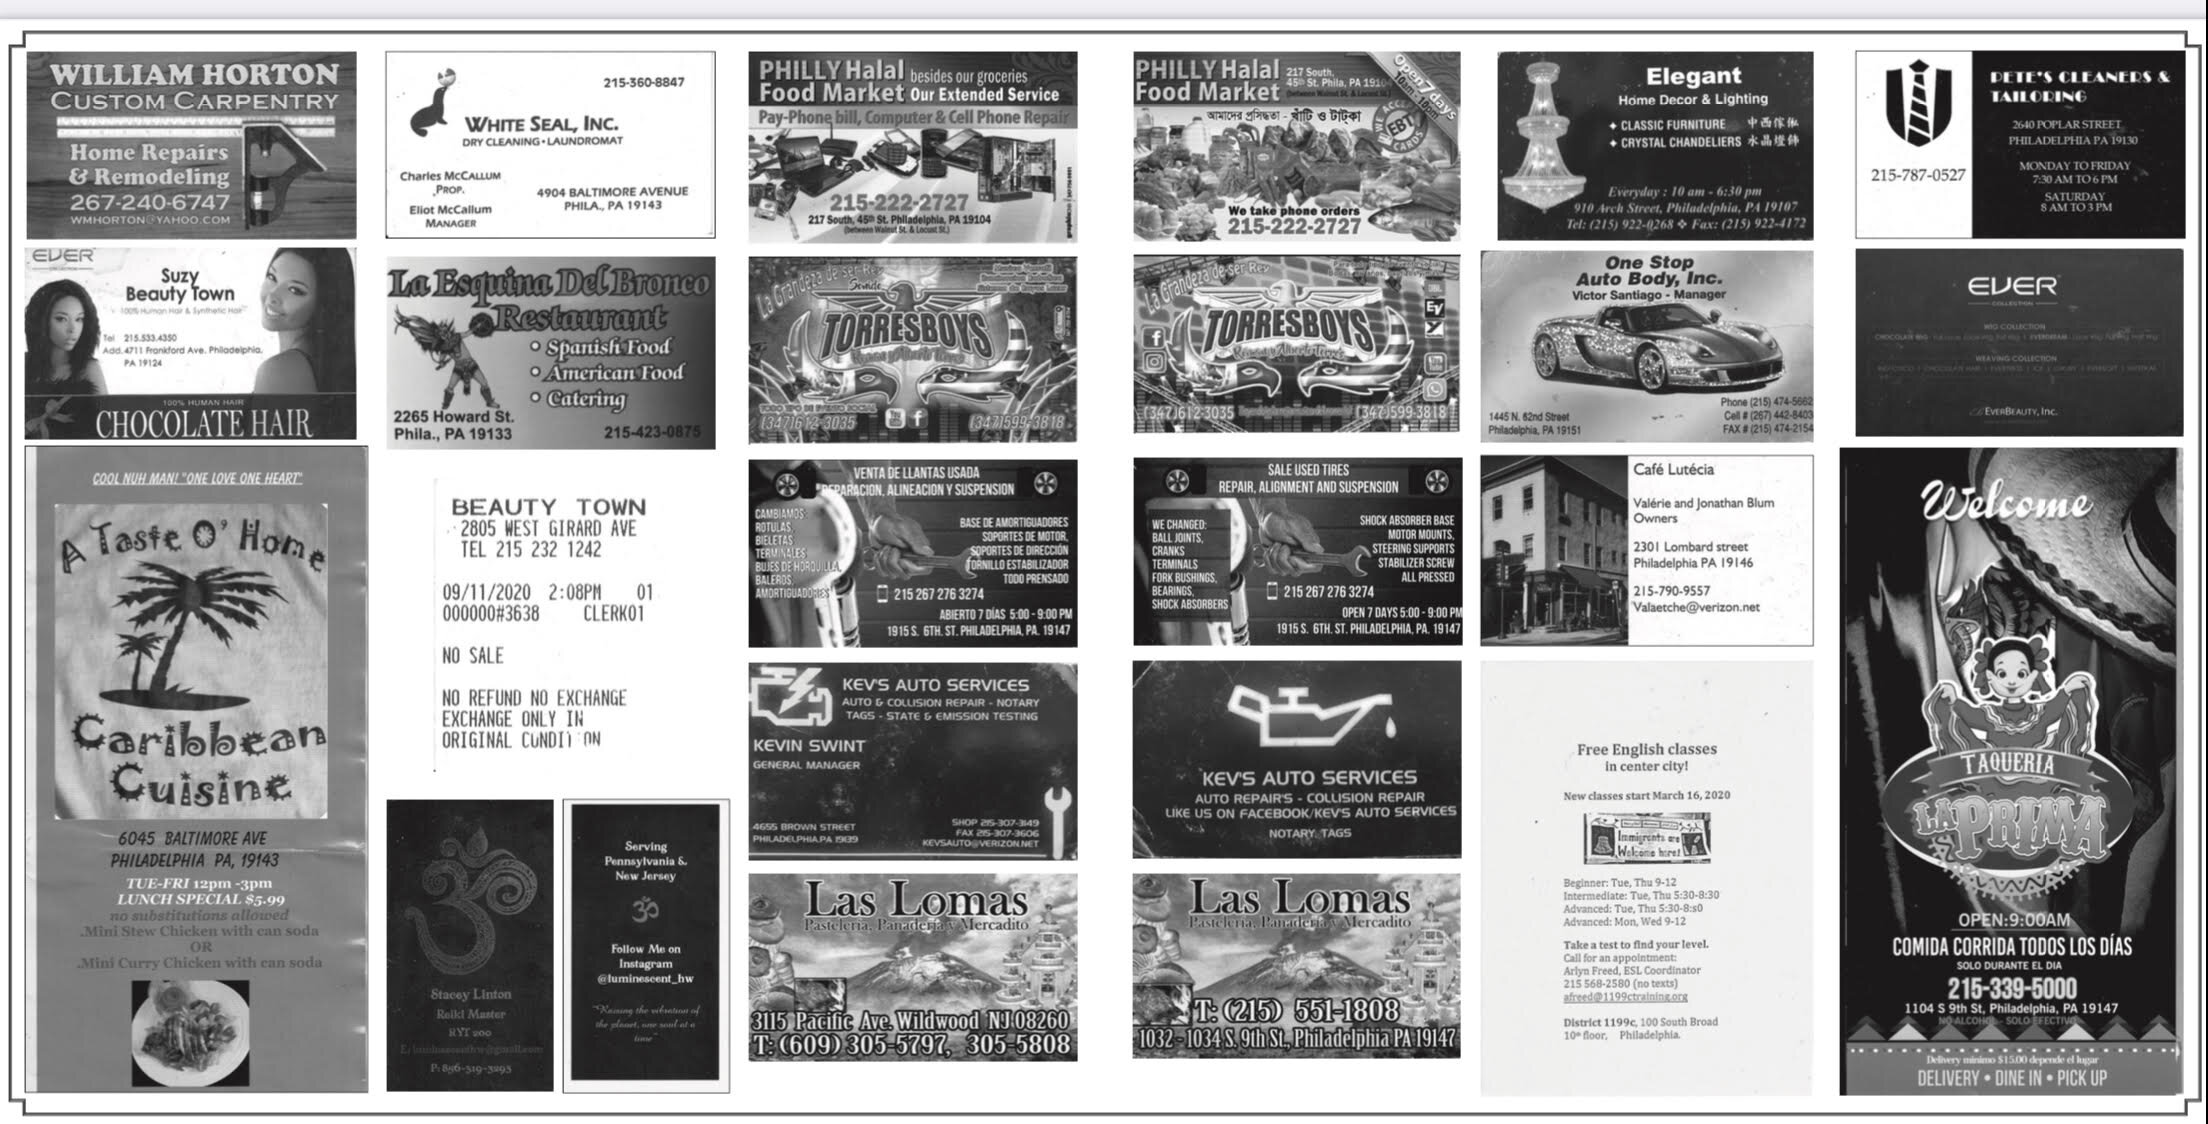 Sample pages from A Phonebook courtesy of the collaborators.